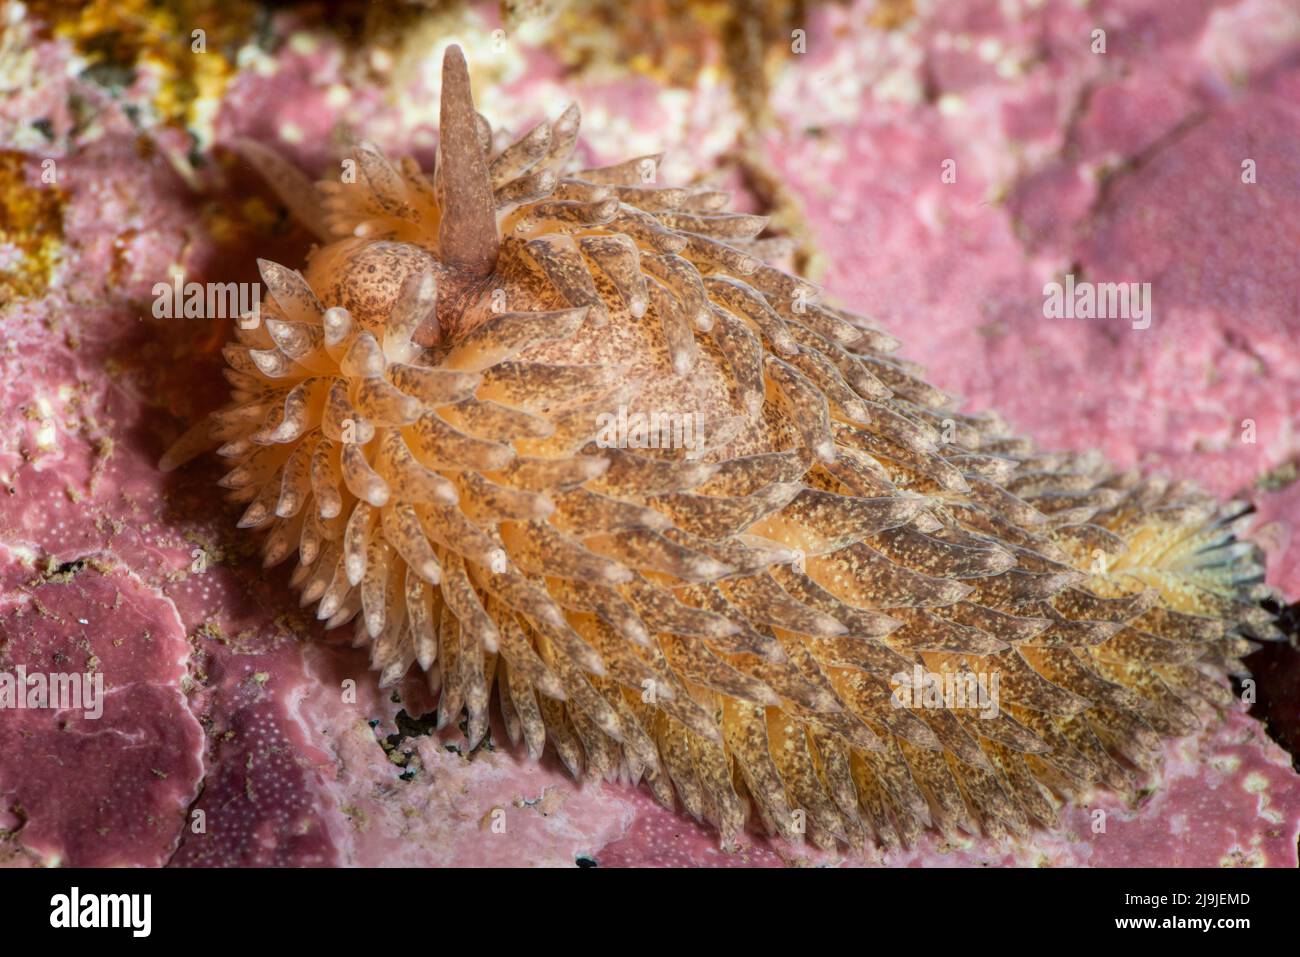 Salmon-gilled nudibranch underwater in the St. Lawrence River Stock Photo